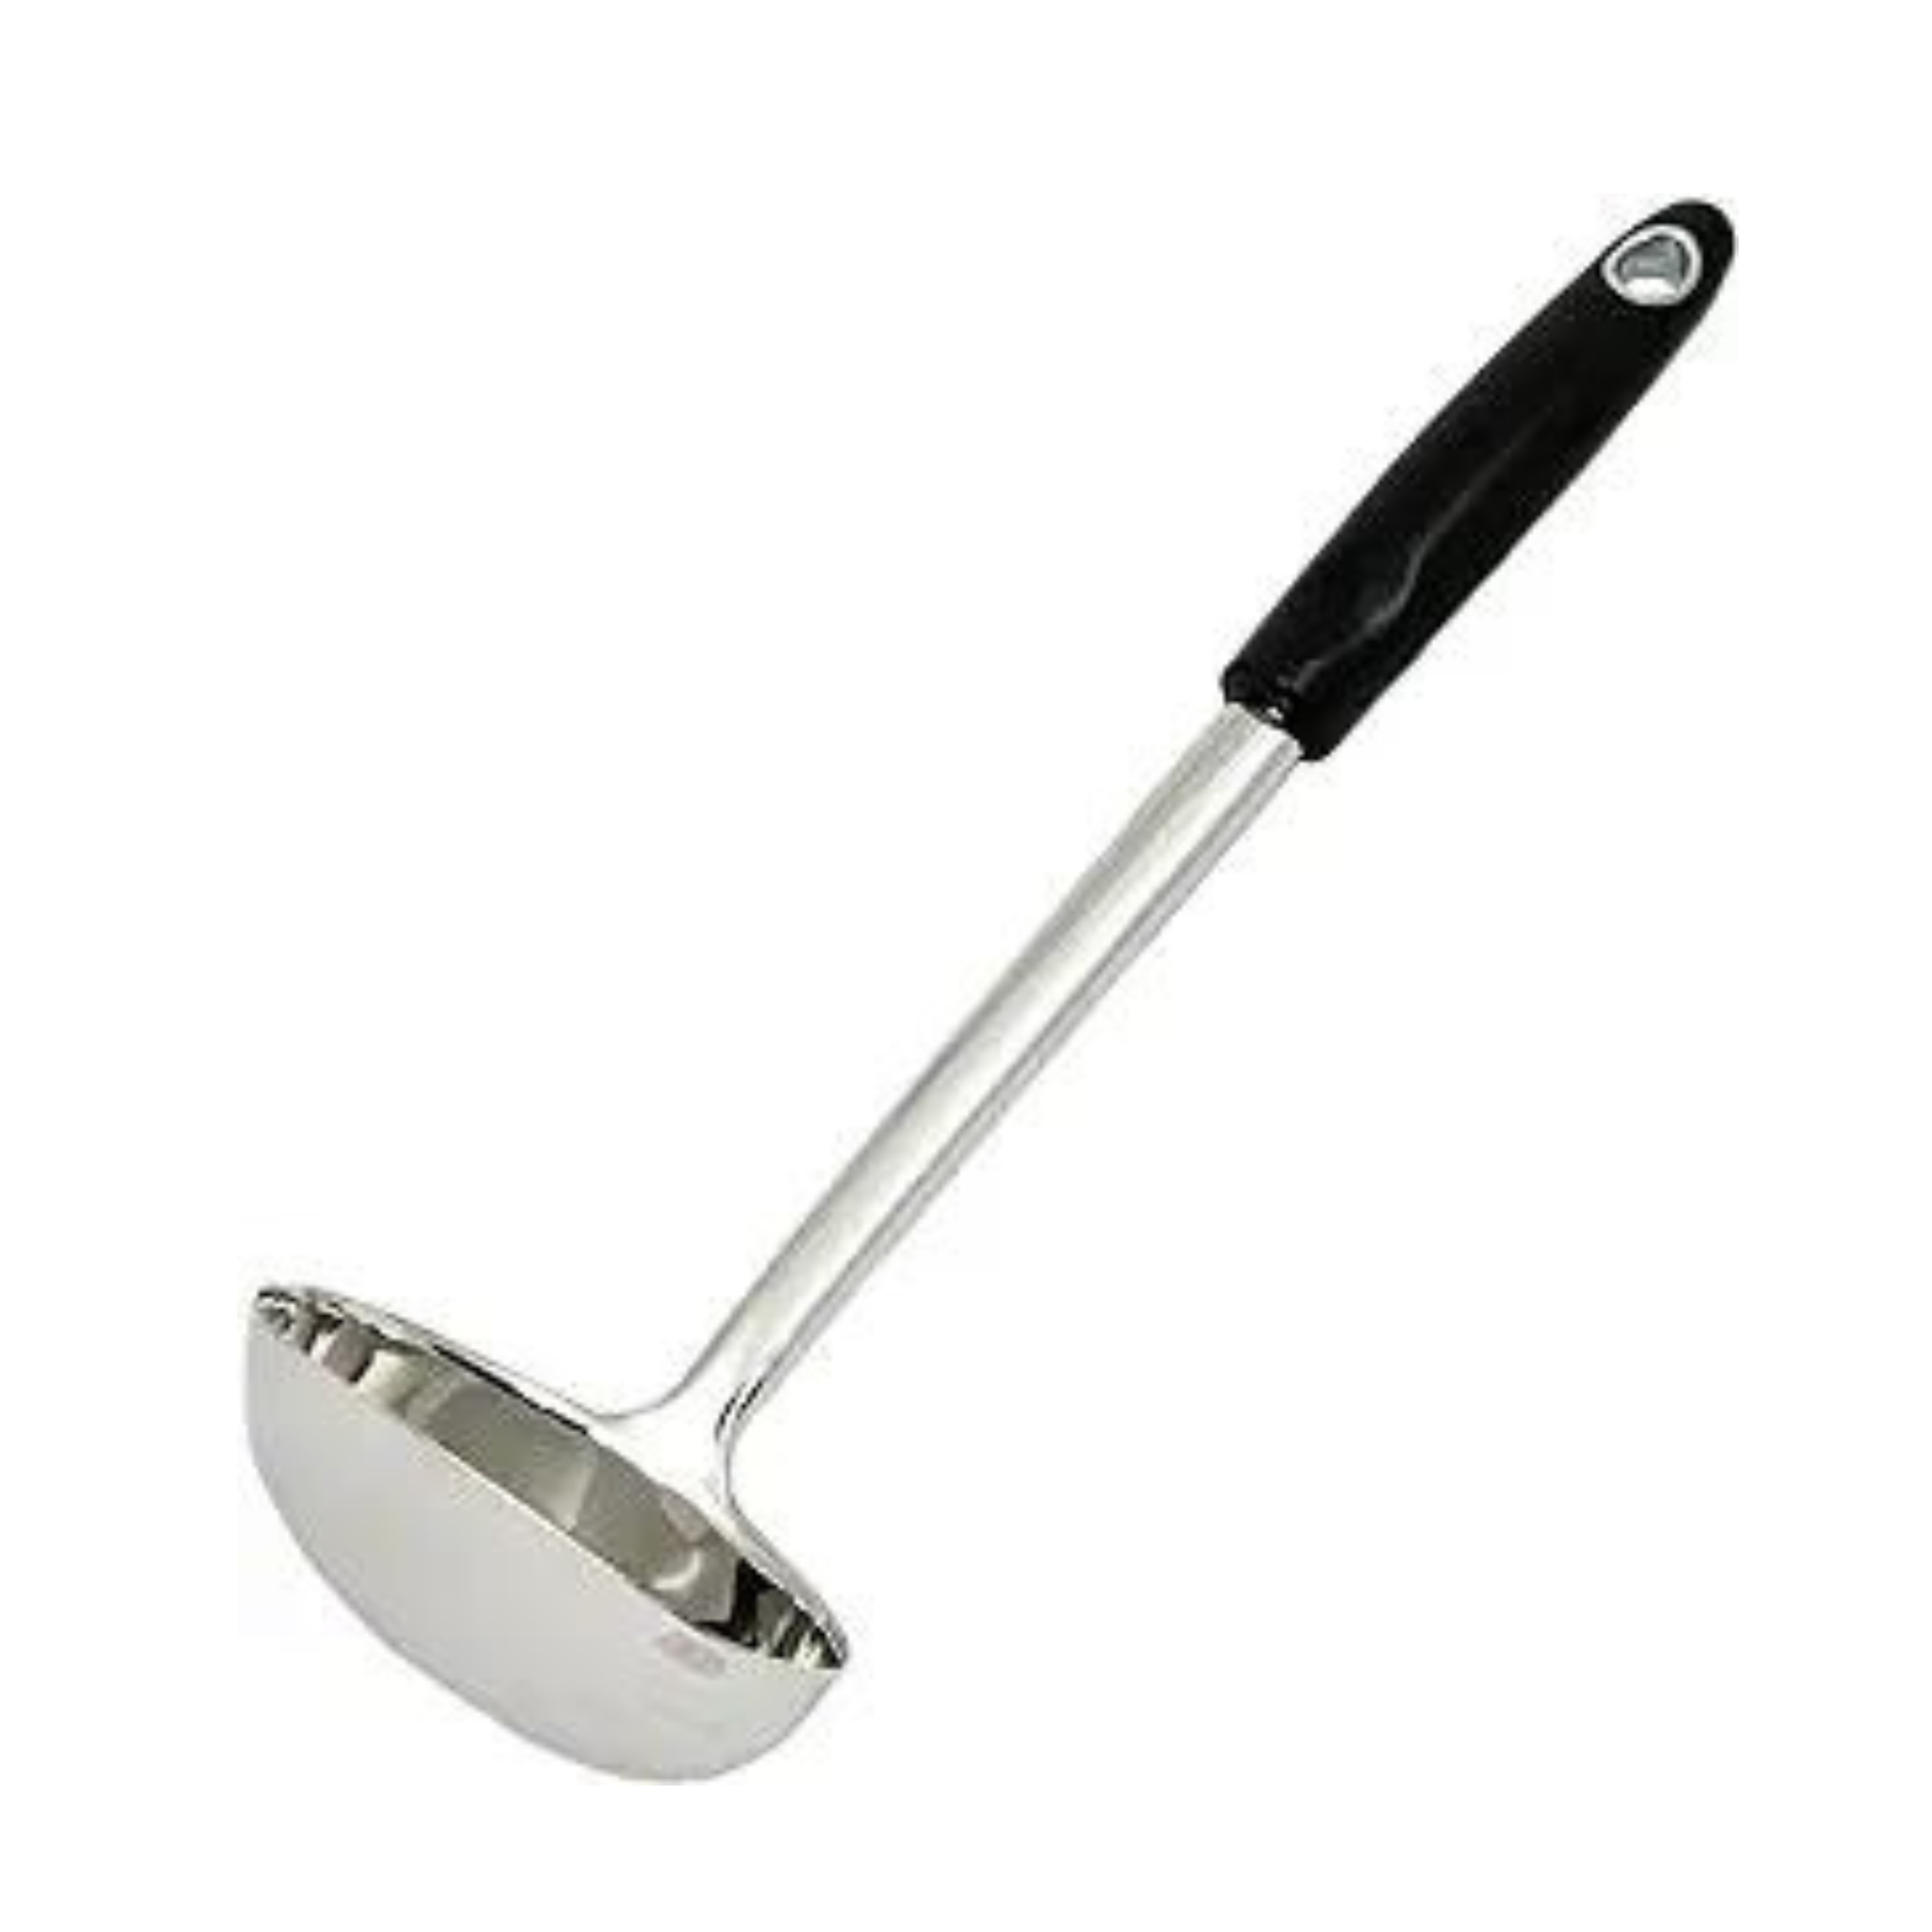 13" Chef Craft Heavy Duty Ladle or Basting Spoon (Stainless Steel)